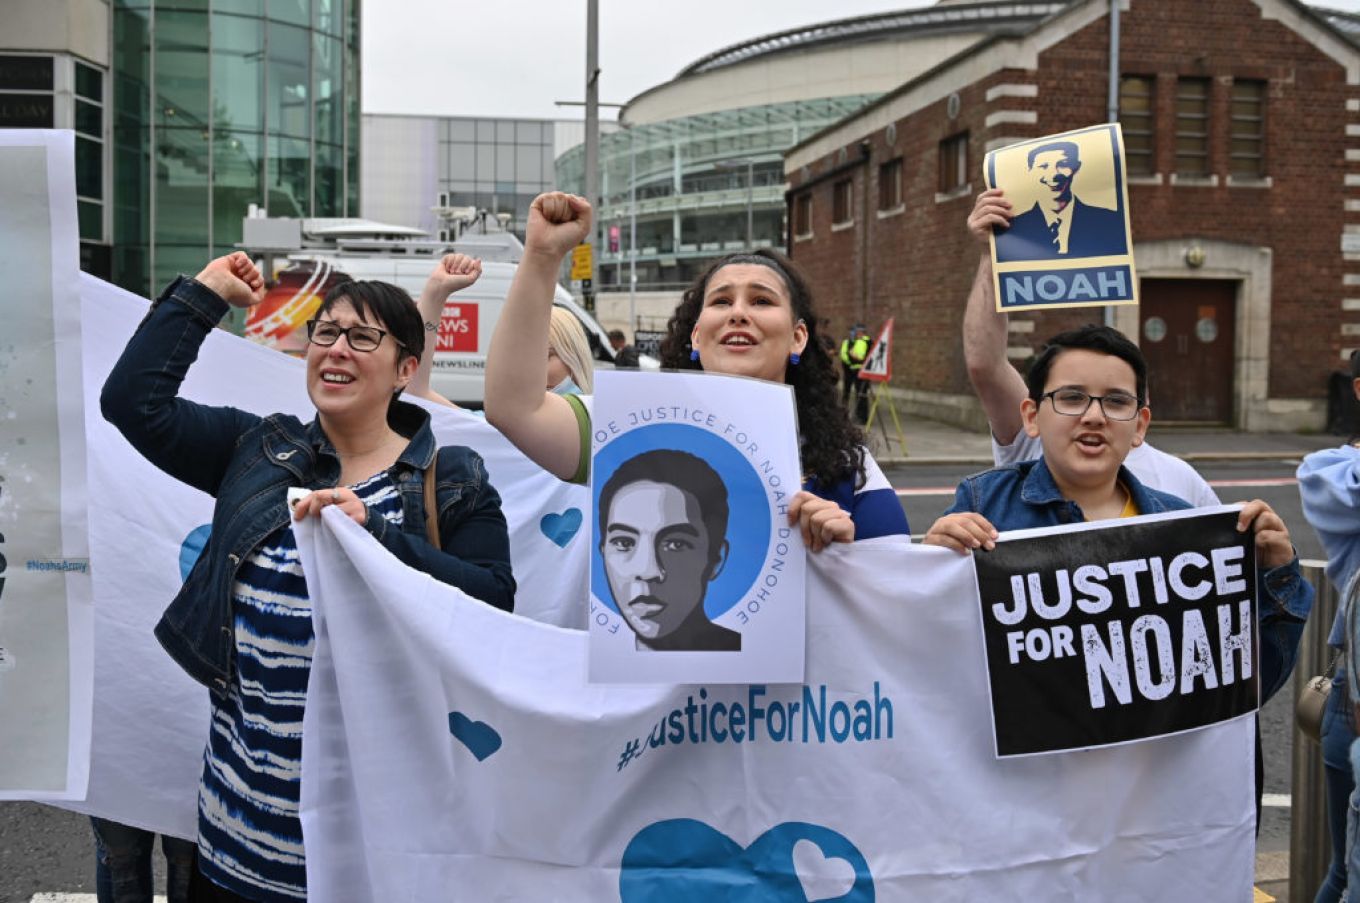 Hundreds Of Campaigners Outside Court In Belfast As A Preliminary Inquest Into The Death Of Noah Donohoe Began On June 30Th. In June 2020, The 14-Year-Old's Body Was Found In A Storm Drain In North Belfast. His Mother Fiona Has Campaigned For Answers Surrounding His Disappearance And Death. Photo: Charles Mcquillan/Getty